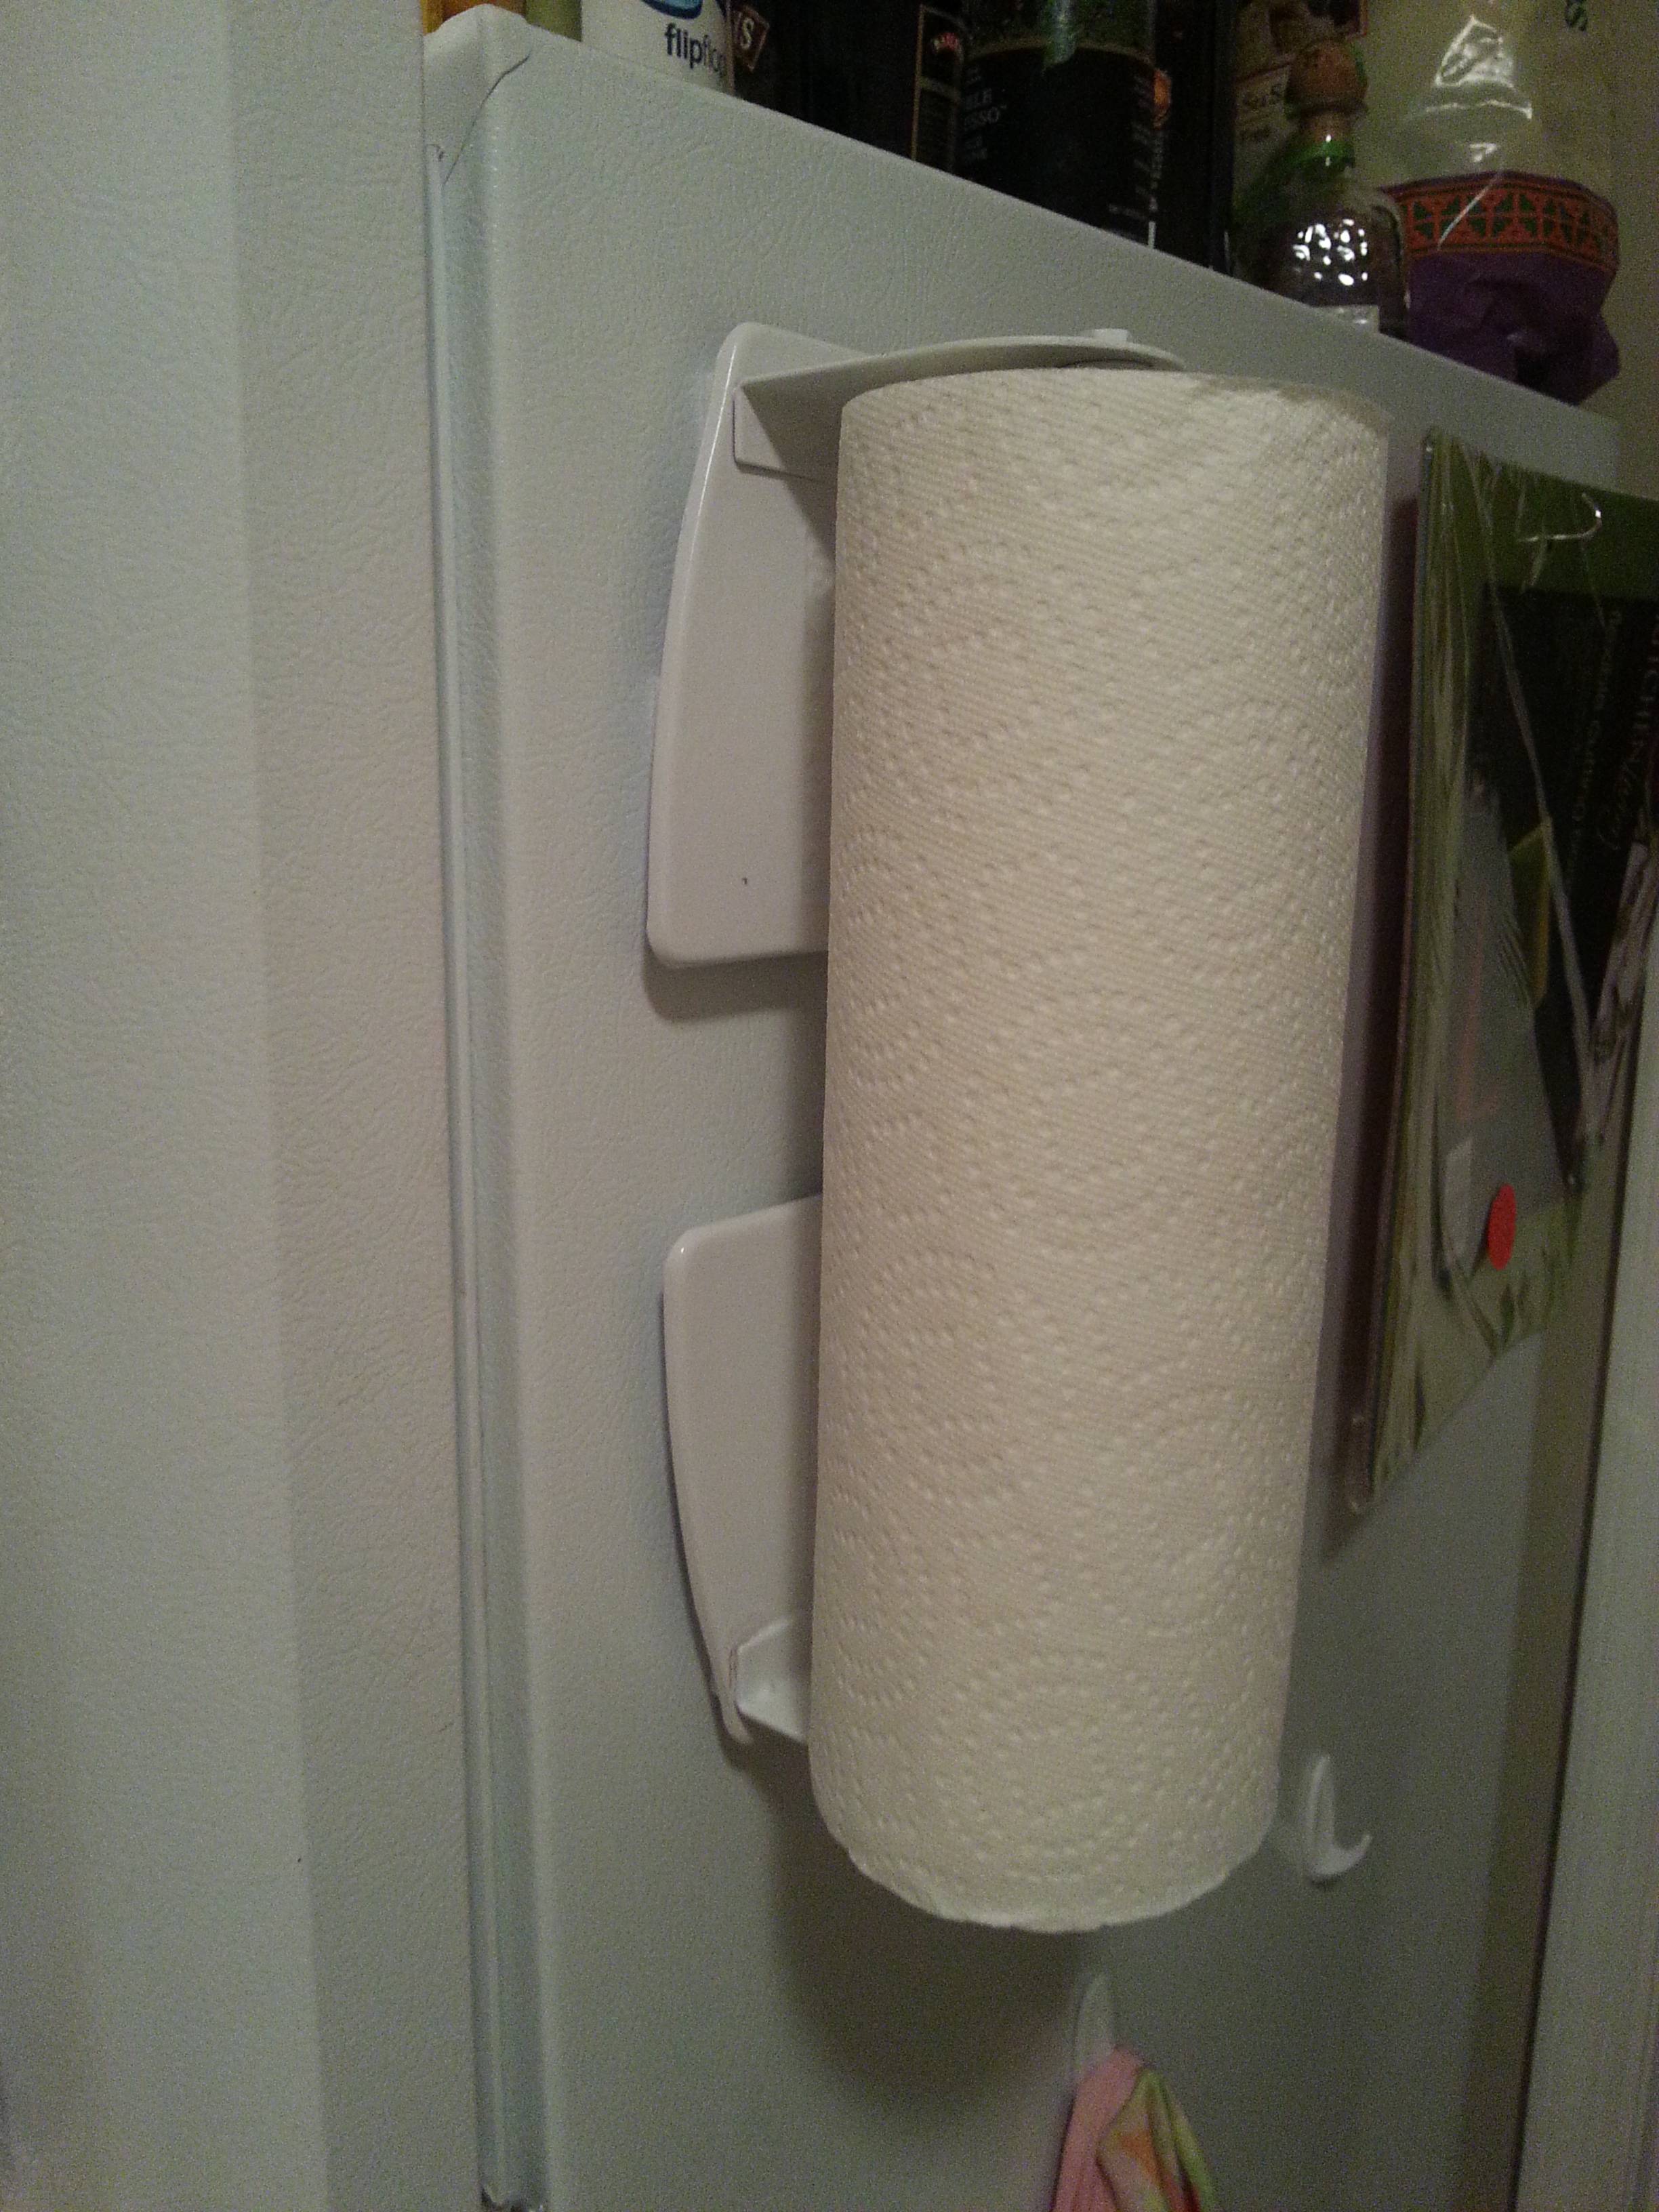 Cheaply Repurpose a Toolbox Paper Towel Holder for Your Refrigerator